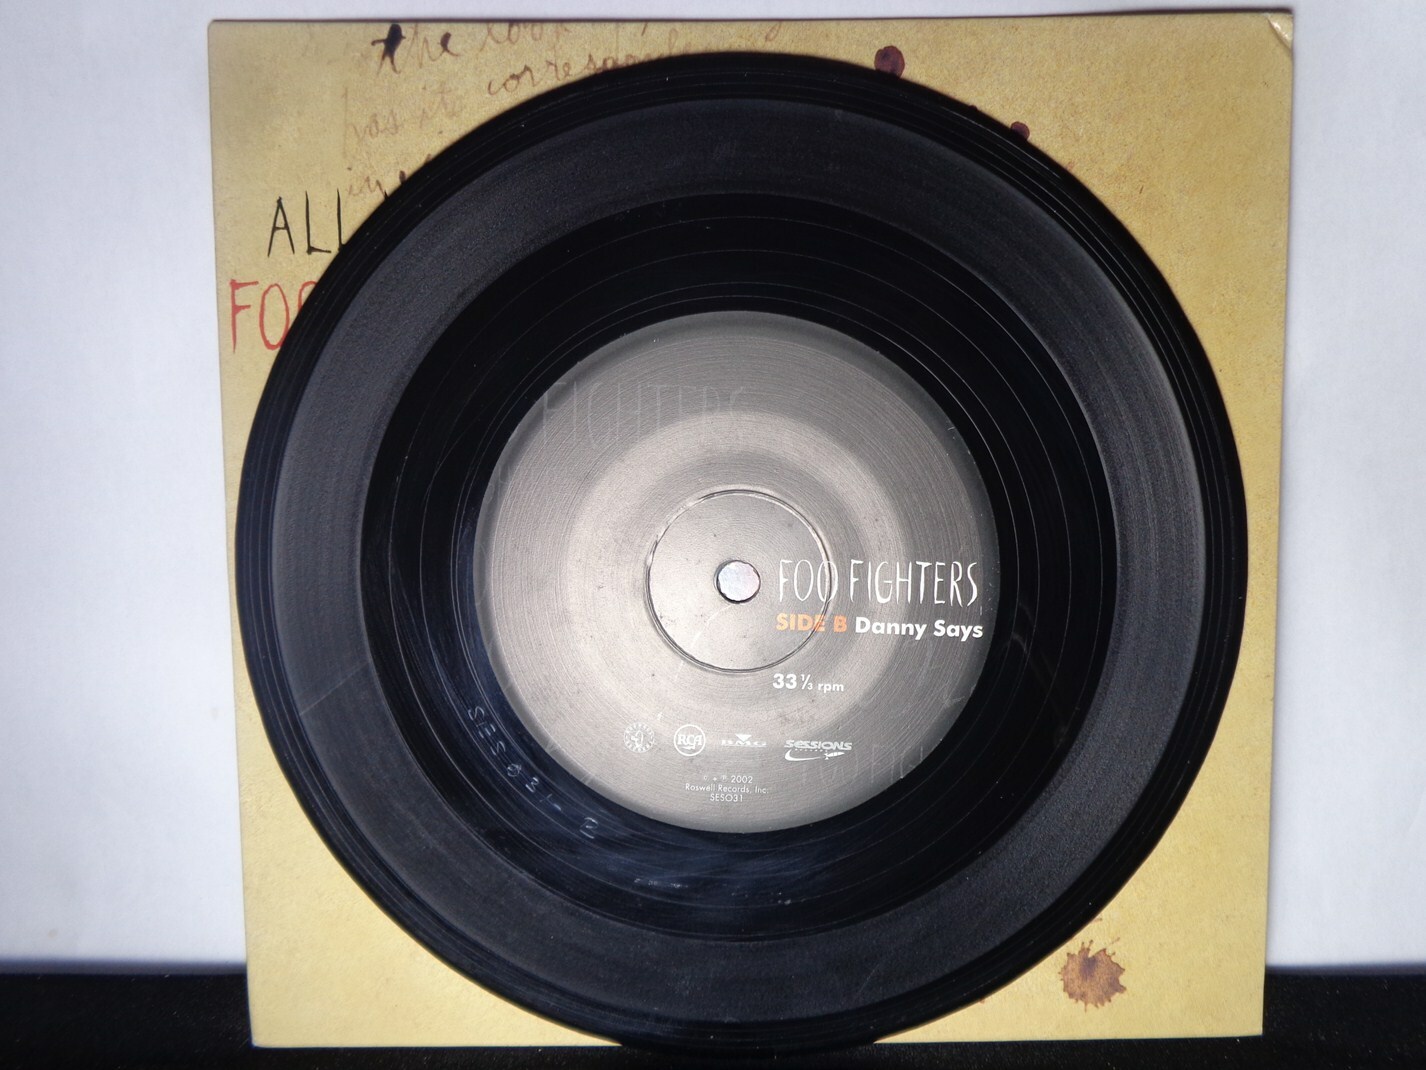 Vinil Compacto - Foo Fighters - All my Life (USA)